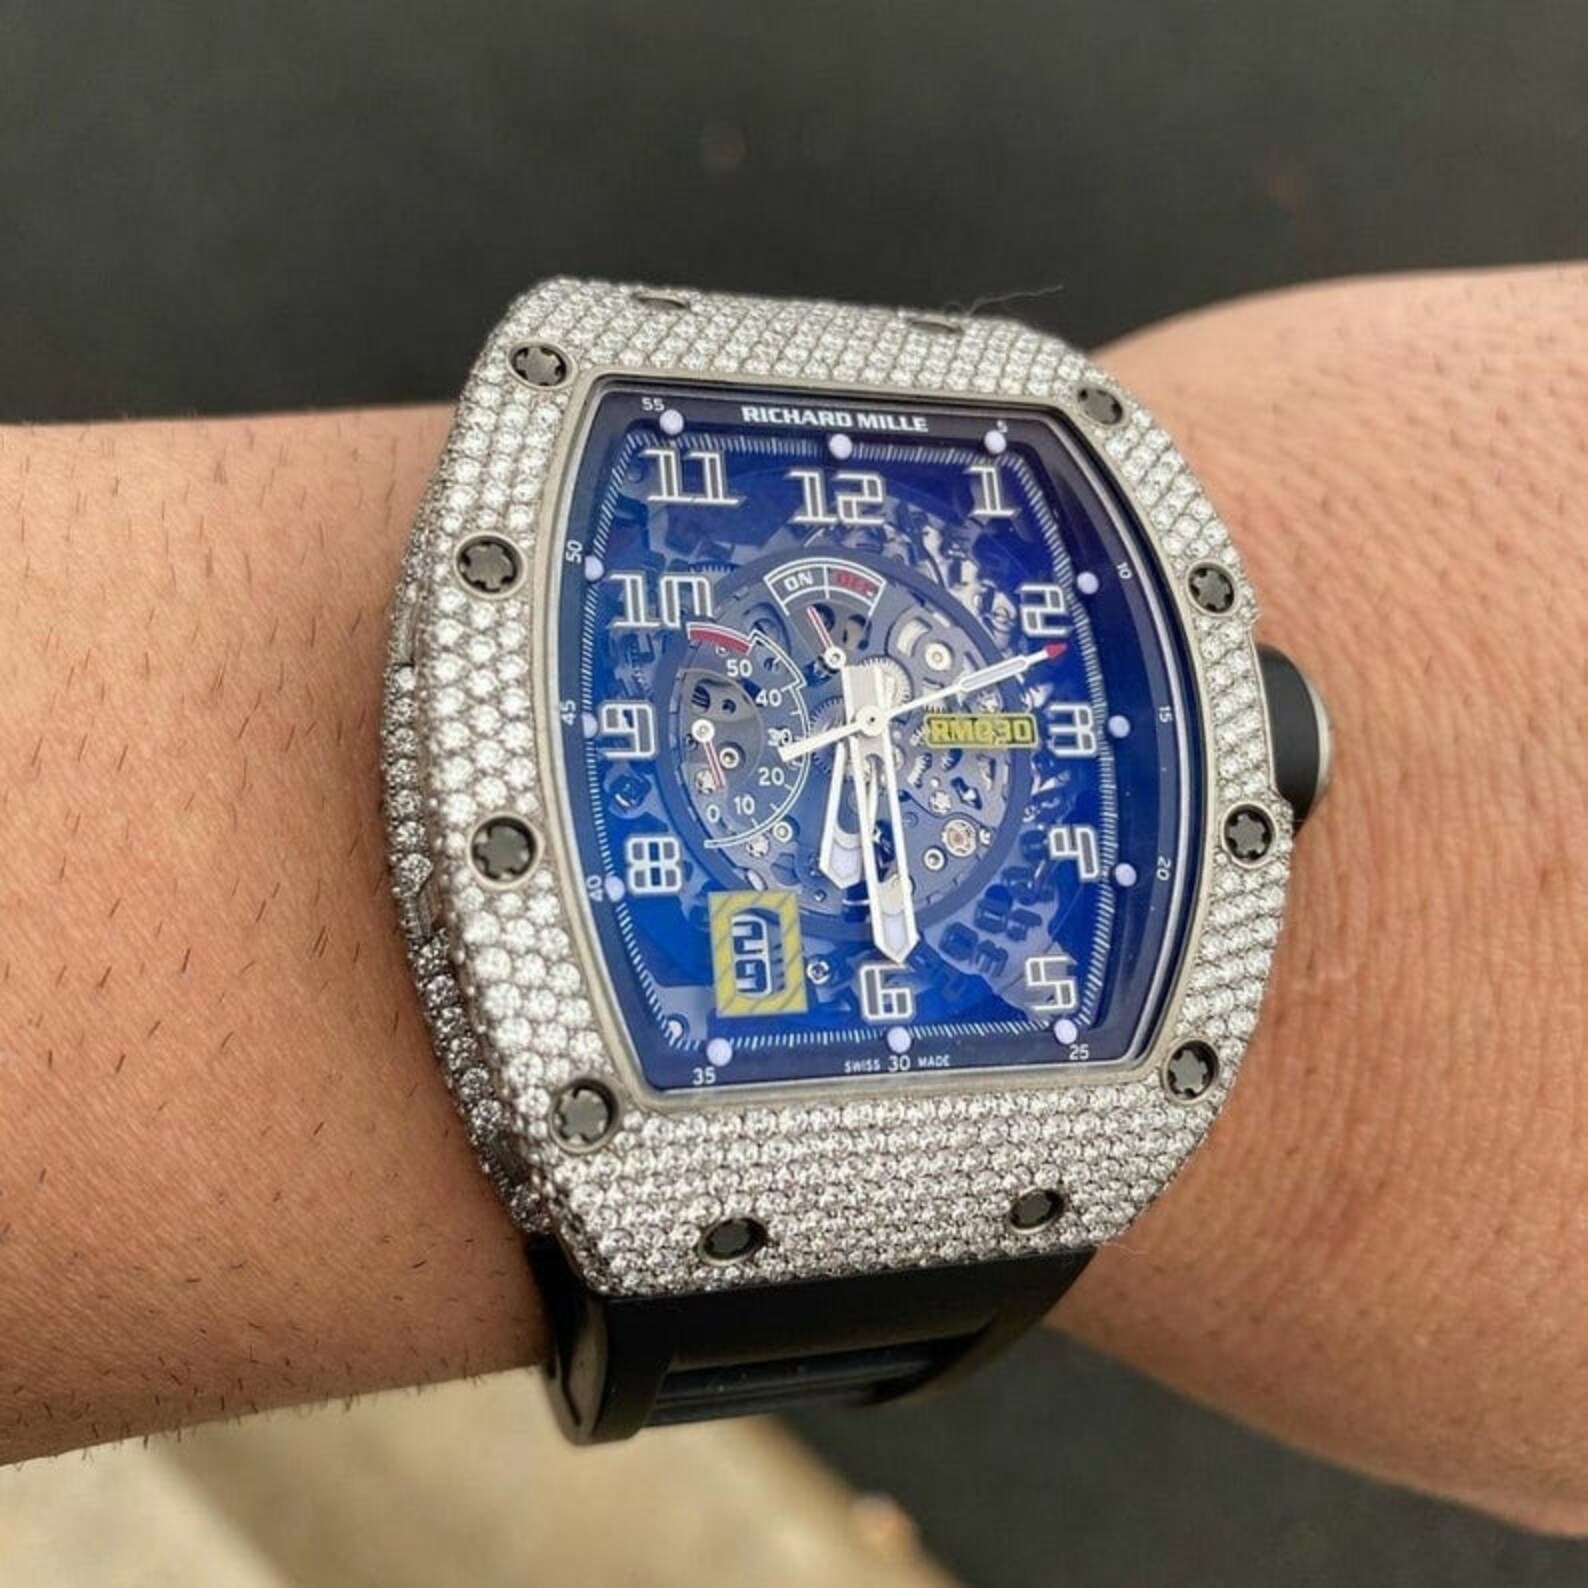 Luxury Iced Out Richard Mille Watch Moissanite Diamond Watch - Etsy